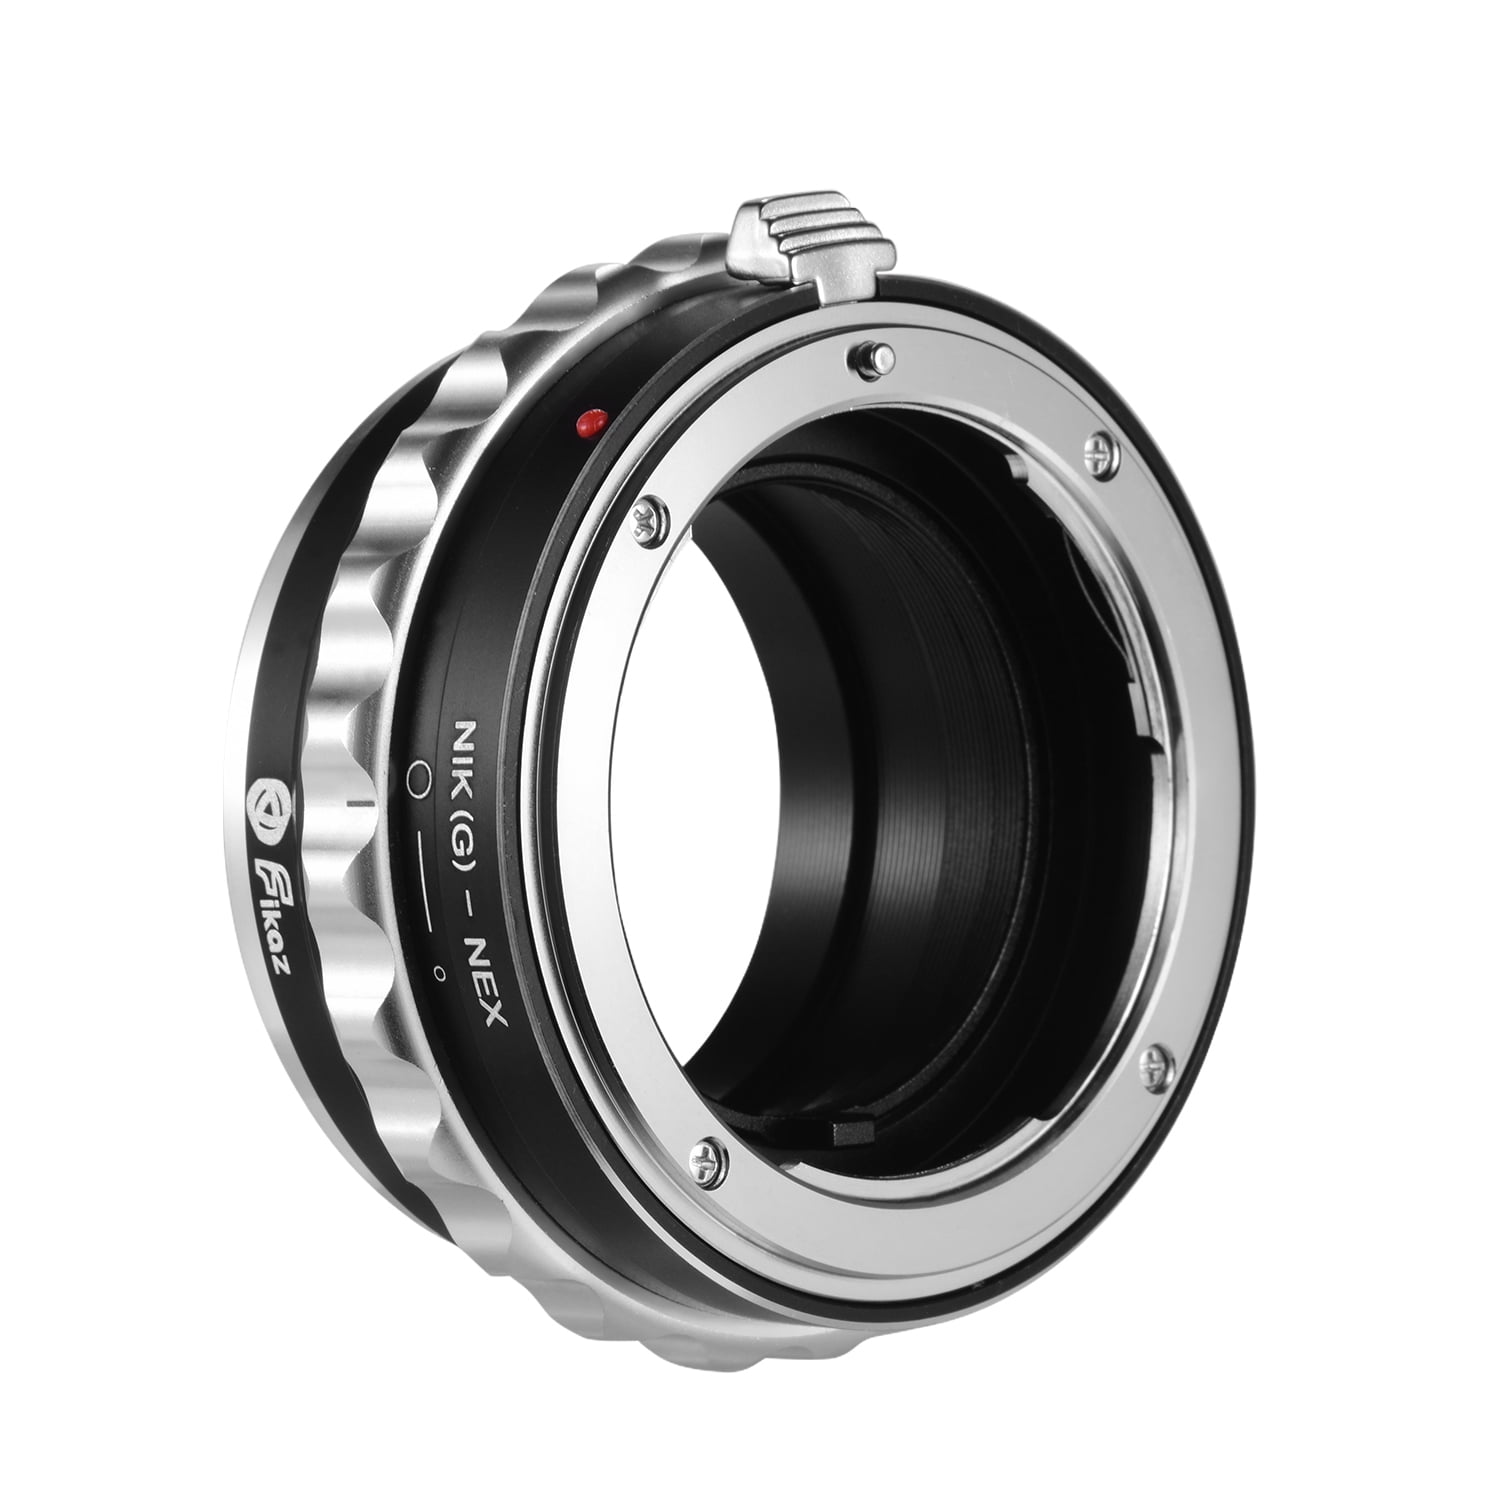 Fikaz Lens Mount Adapter Ring Aluminum Alloy Compatible with Nikon 